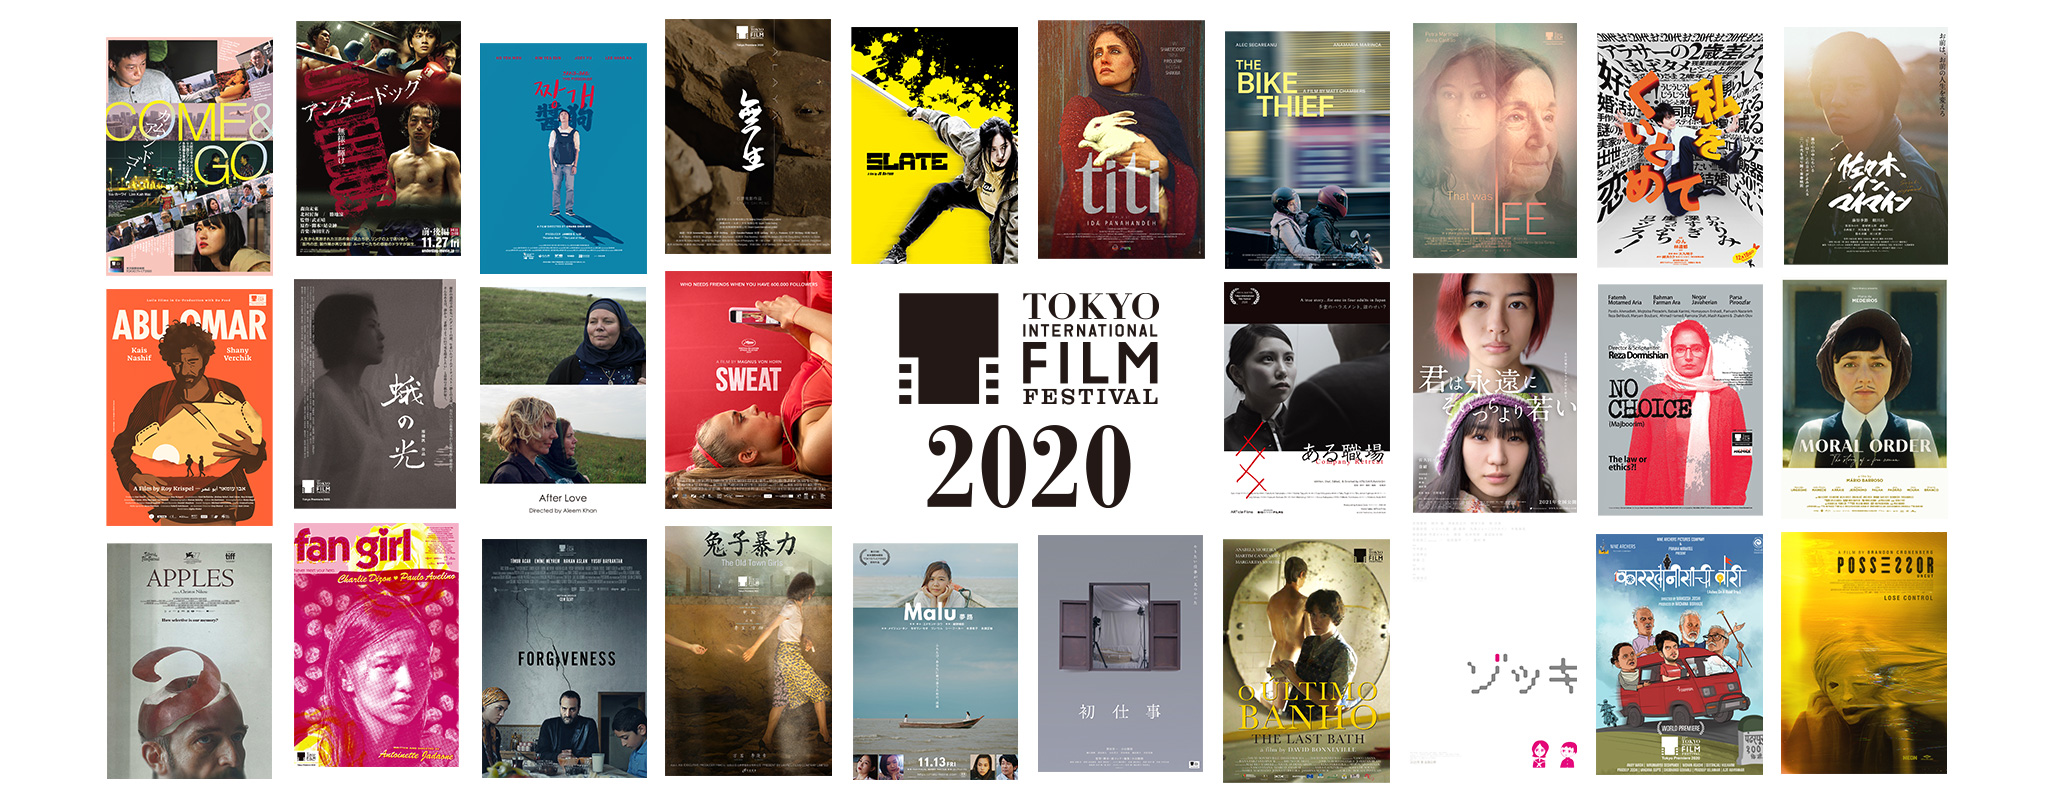 Tokyo Premiere 2020: A new showcase category with a focus on World Premiere and Asian Premiere films by unique directors from around the world. While maintaining a balance of works from Japan, Asia, Europe, and America, this program retains the former three competition sections' selection vantage.